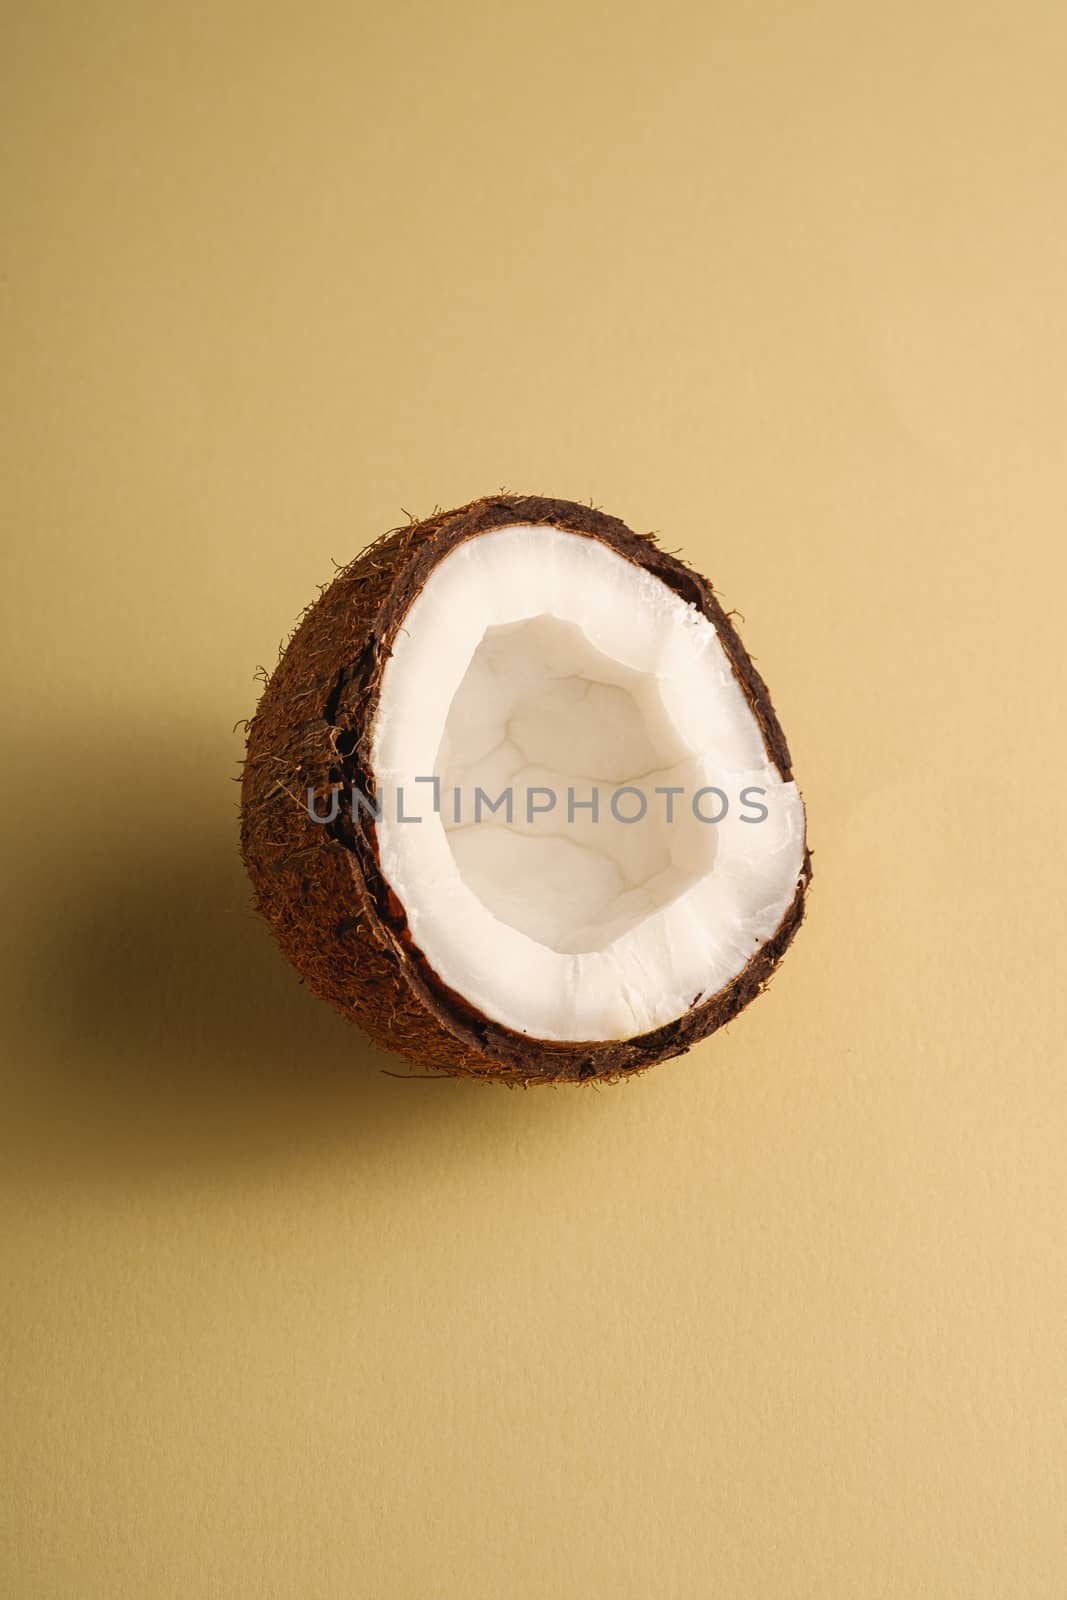 Single coconut fruit on cream yellow plain background, abstract food tropical concept, angle view copy space